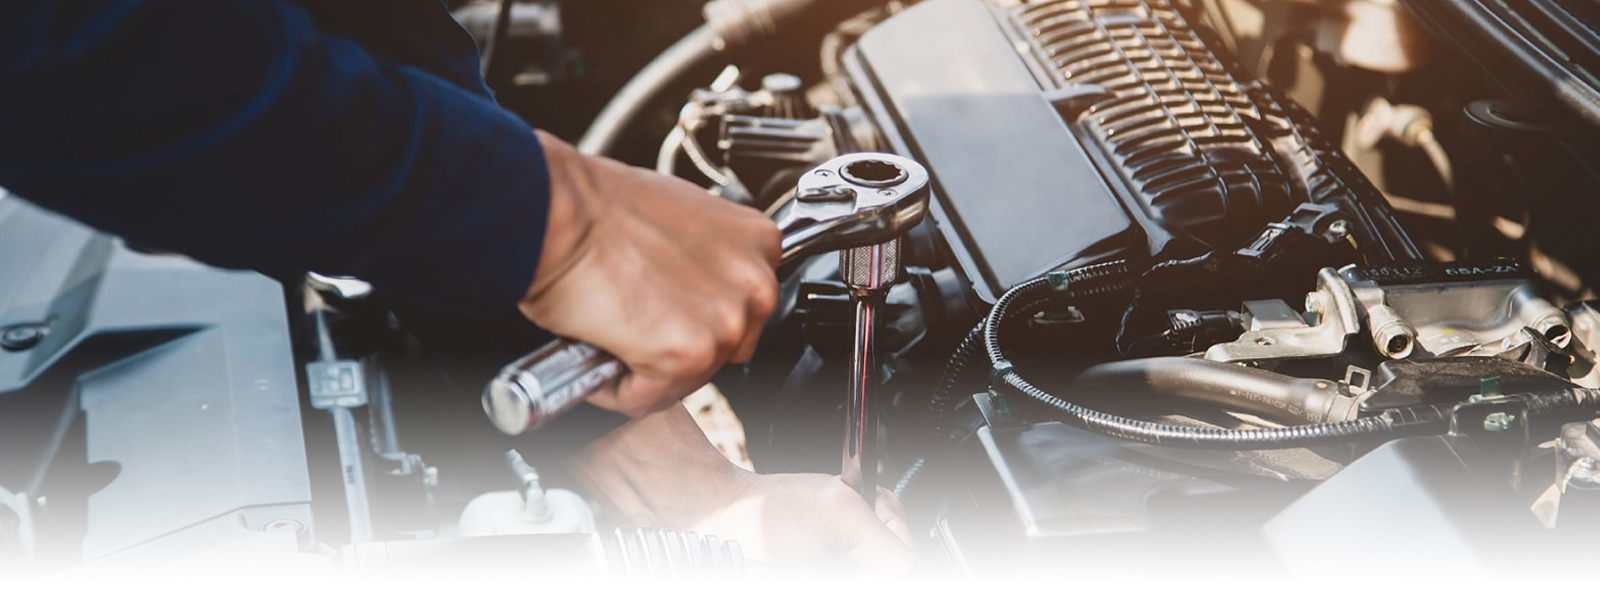 Boynton Auto Repair and Transmission LLC offers a wide range of services to Boynton Beach, FL and surrounding areas.